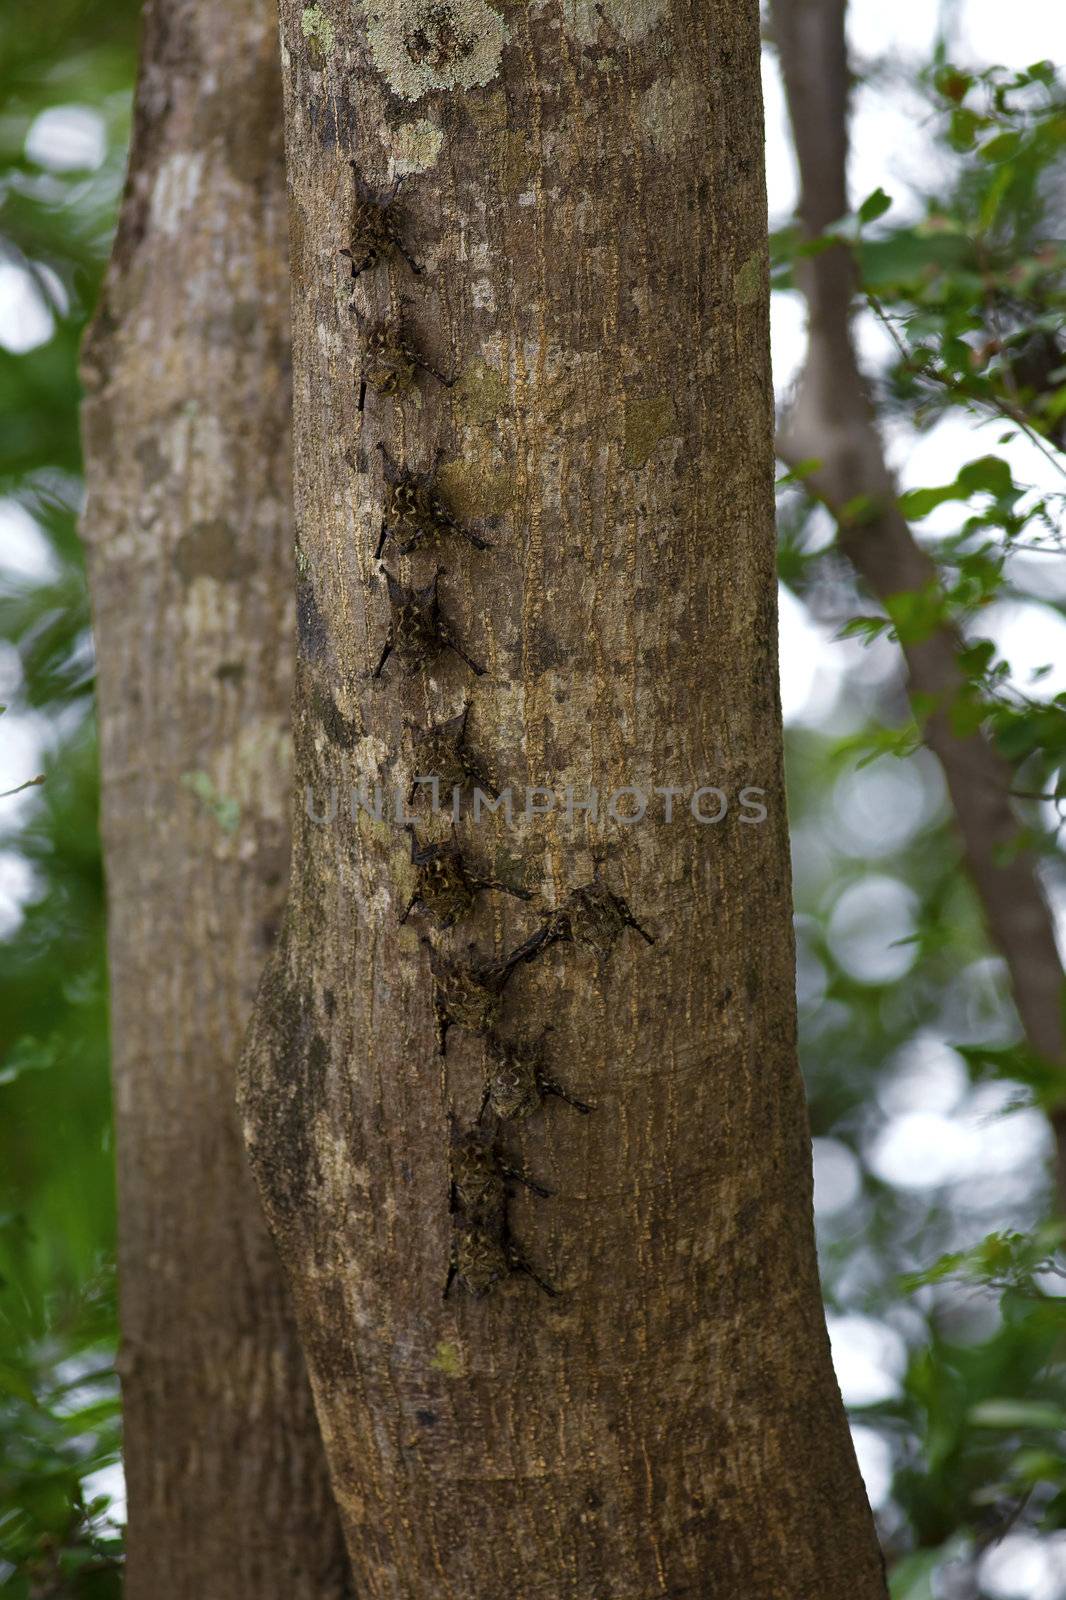 Long nosed bats forming a line in a tree, Costa Rica